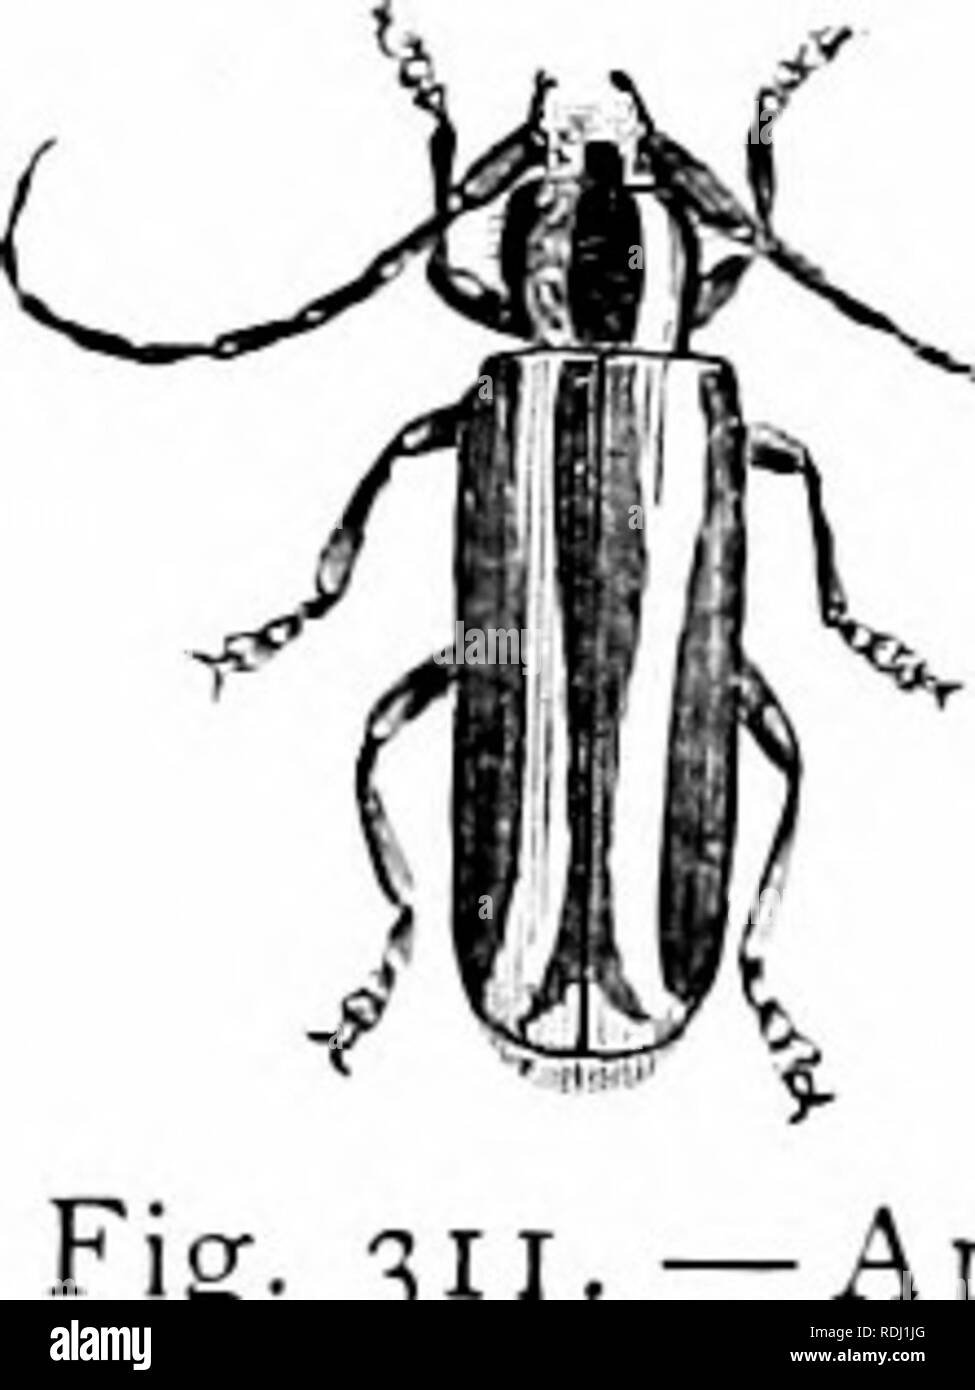 . Natural history of animals;. Zoology. i8o ARTHRUPUDS : INSECTS. Pine Weevil, in the larva state, lives in the trunk of the pine, in hich it cuts passages in various direc- tions. The Long-snouted Nut Wecxil, in the larva state, lives in nuts. The Plum Weevil, when shaken from the tree, looks like a dried bud. This weevil makes a crescent-shaped wound on the surface of the plum, in which it lays an egg; from the egg there hatches a whitish grub, which burrows into the plum, even to the stone. The Rice Weevil feeds upon rice, wheat, and Indian corn. It is about one tenth of an mch long, with Stock Photo